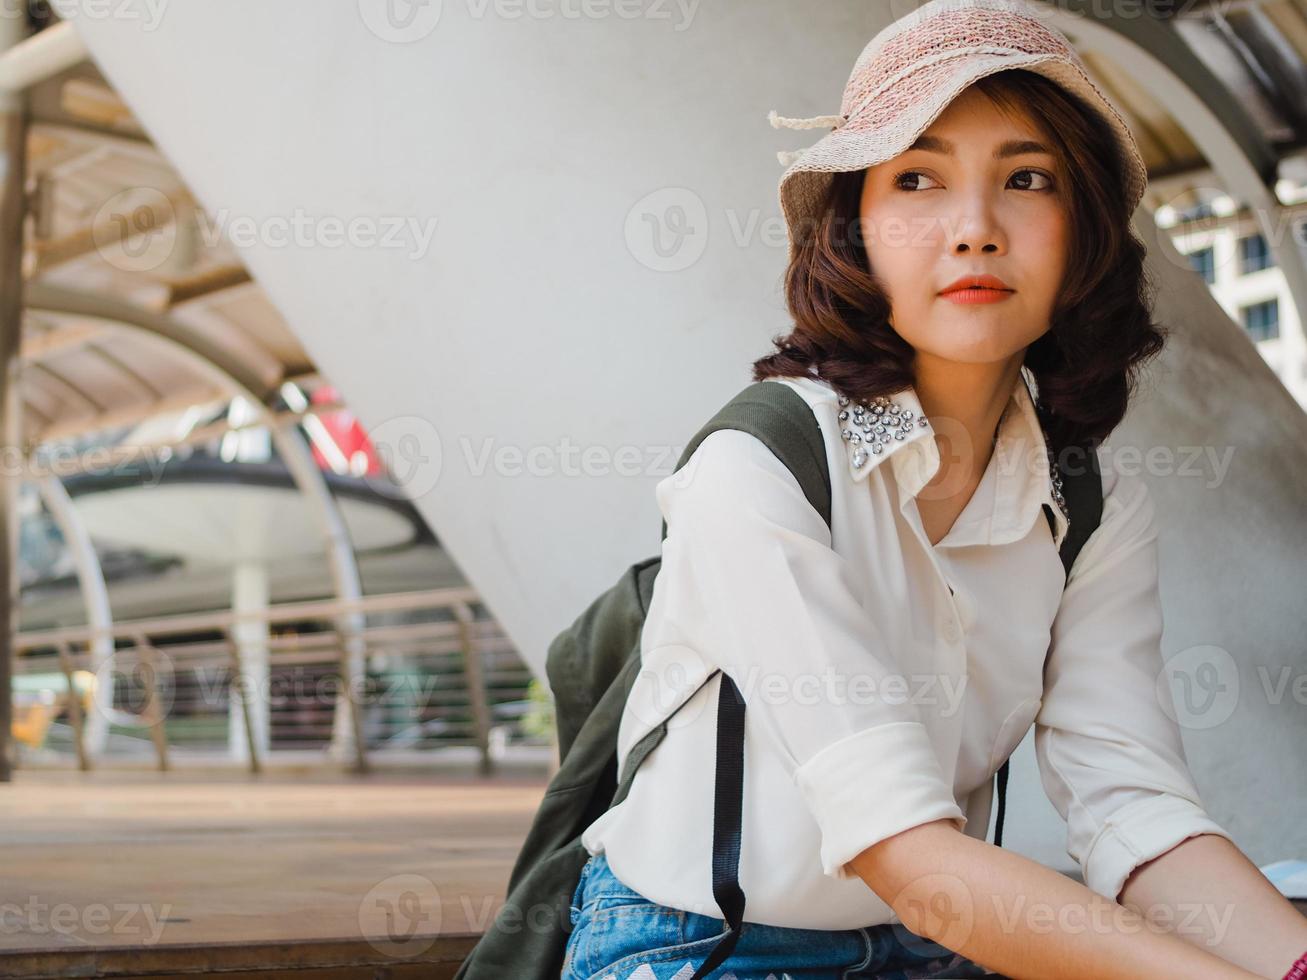 Attractive young smiling Asian woman outdoors portrait in the city real people series. Outdoors lifestyle fashion portrait of happy smiling Asian girl. Summer outdoor happiness portrait concept. photo